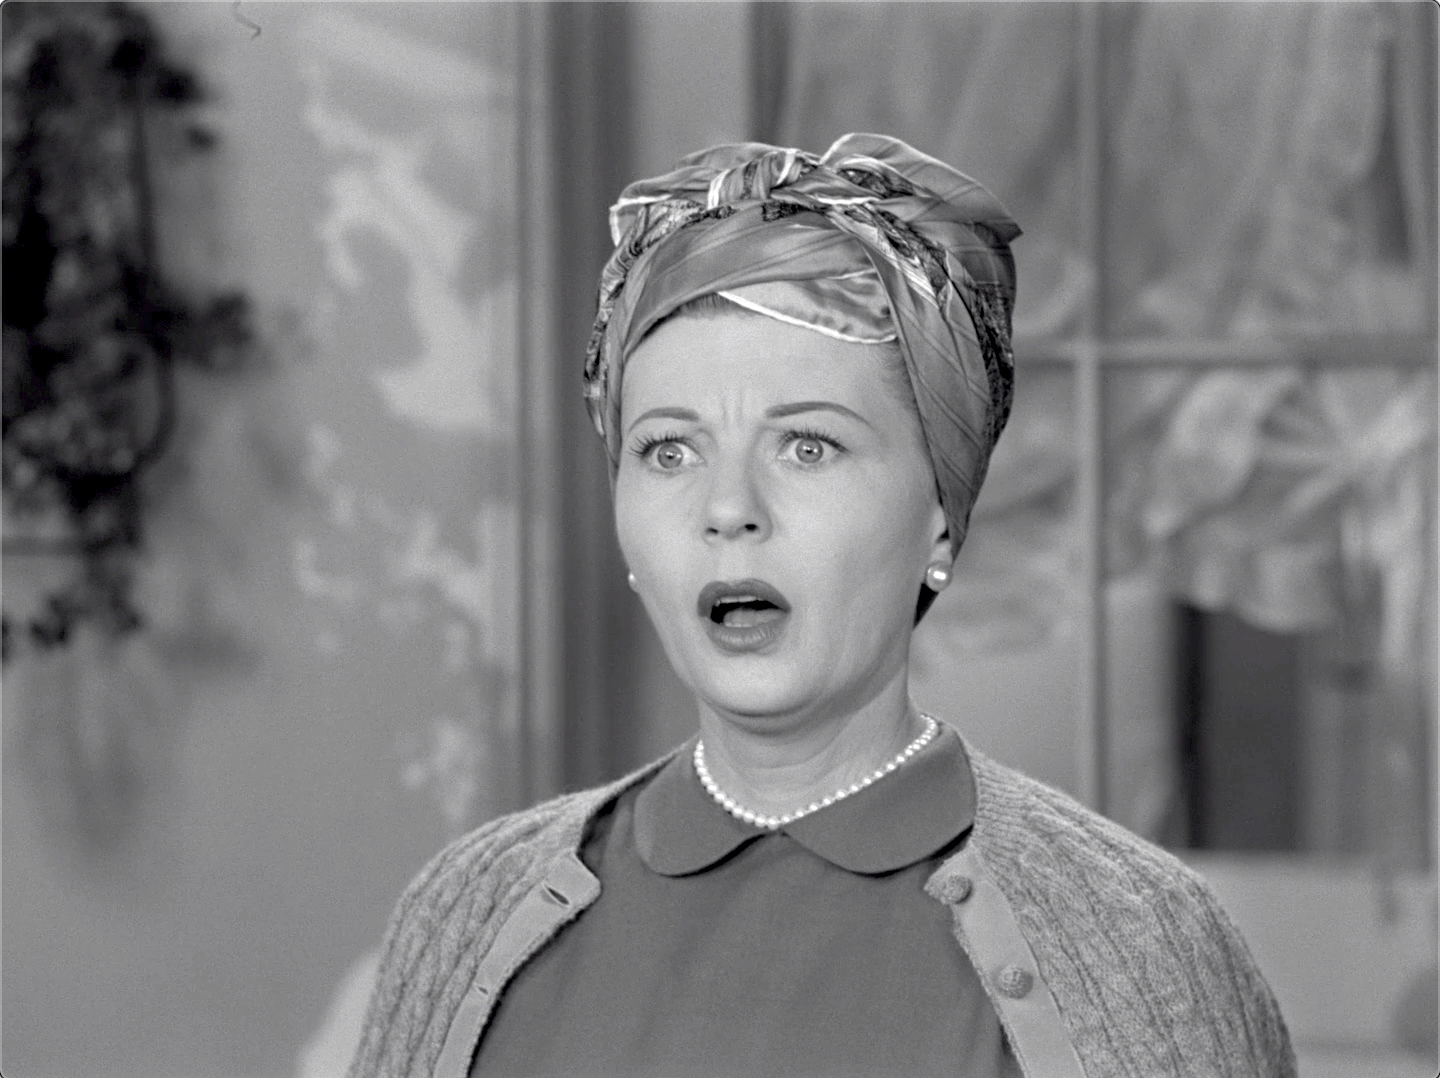 The Adventures of Ozzie and Harriet S05E15 Hairstyle For Harriet (Jan.09.1957)-132.jpg